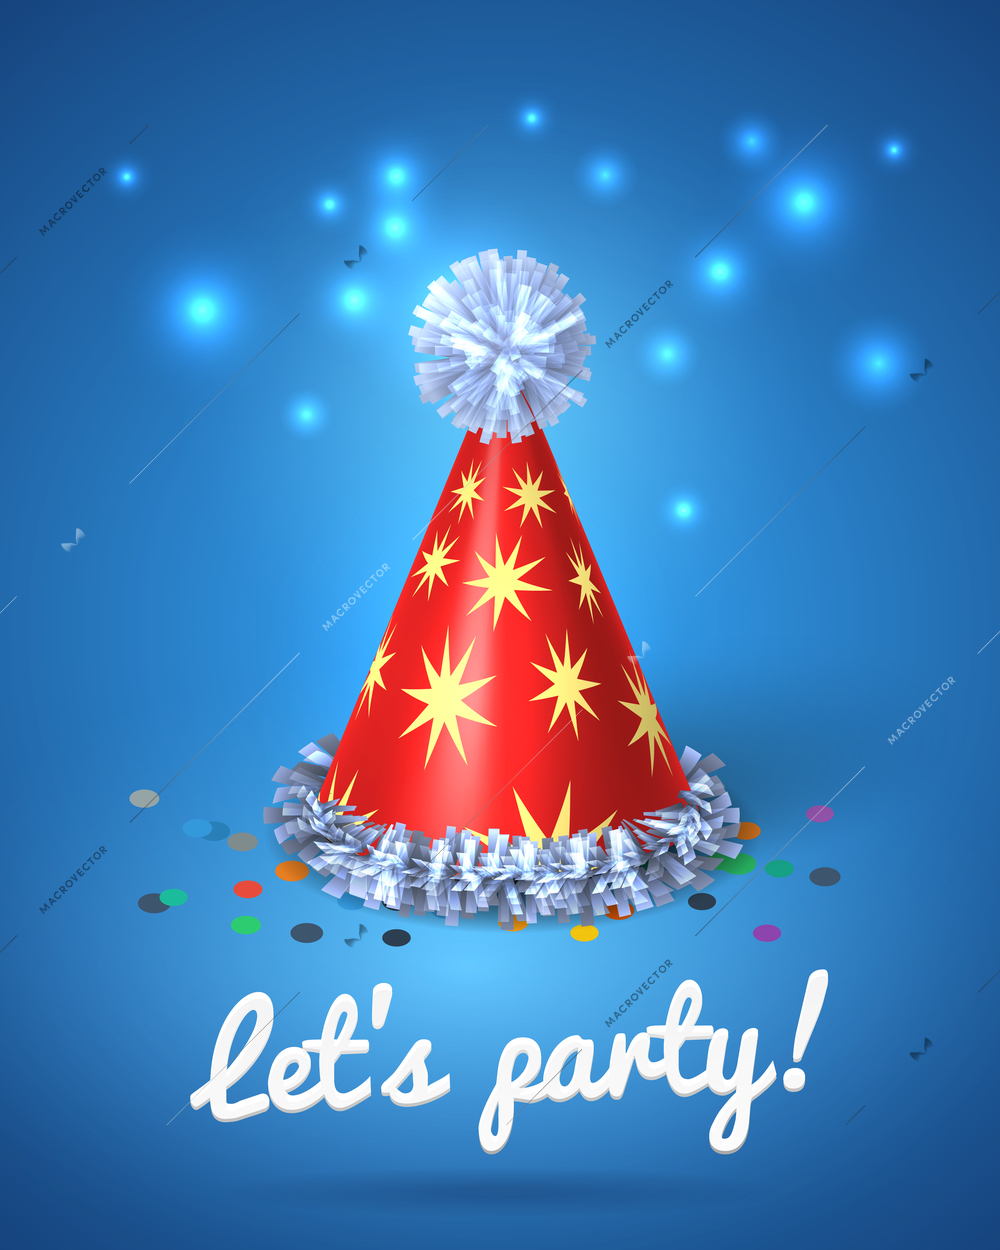 Let's party poster with red hat and stars on blue background vector illustration